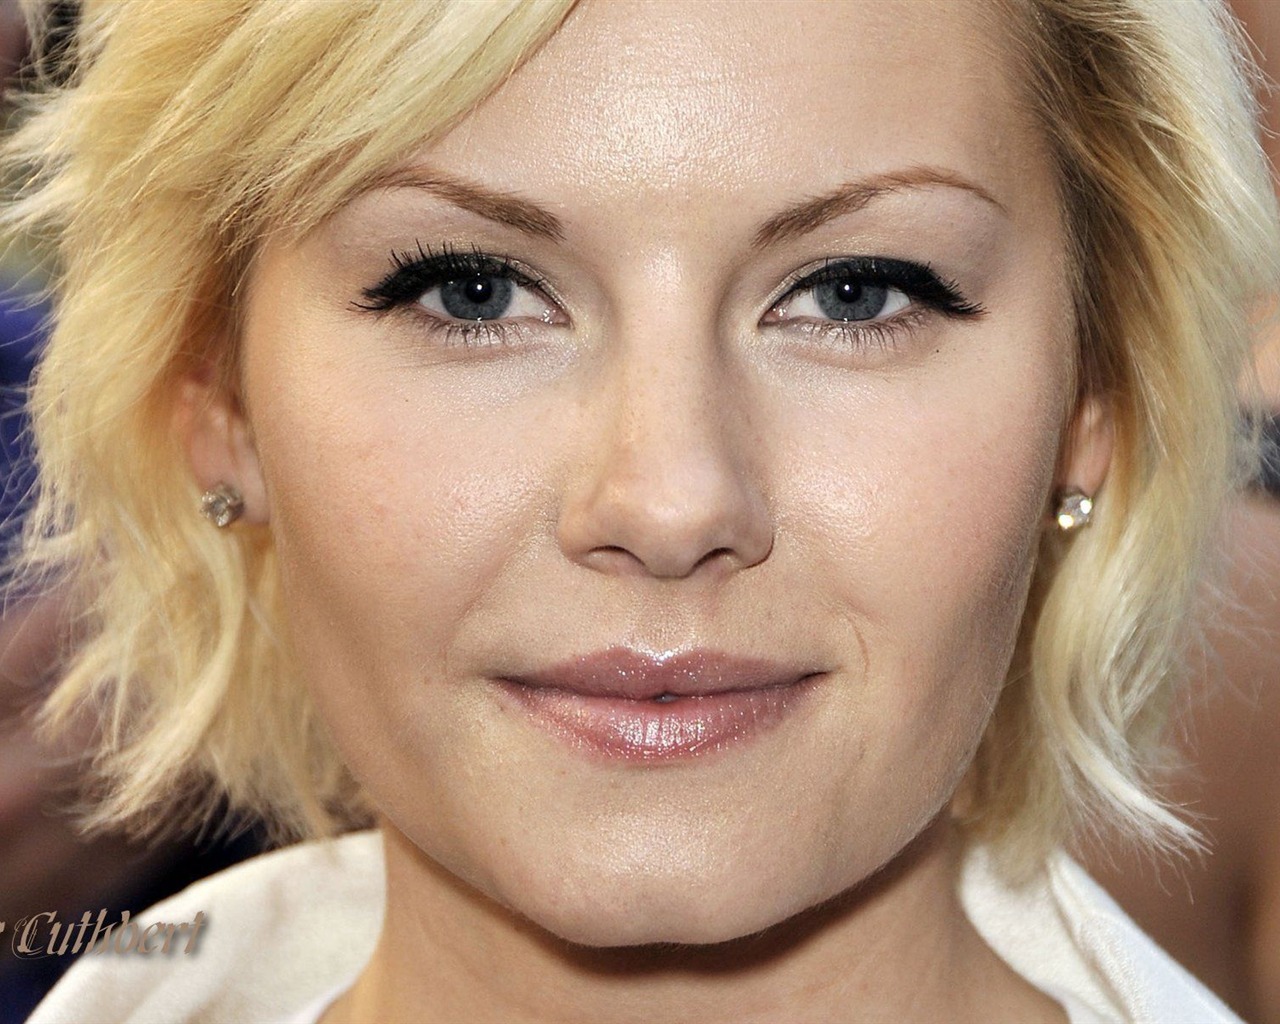 Elisha Cuthbert #005 - 1280x1024 Wallpapers Pictures Photos Images